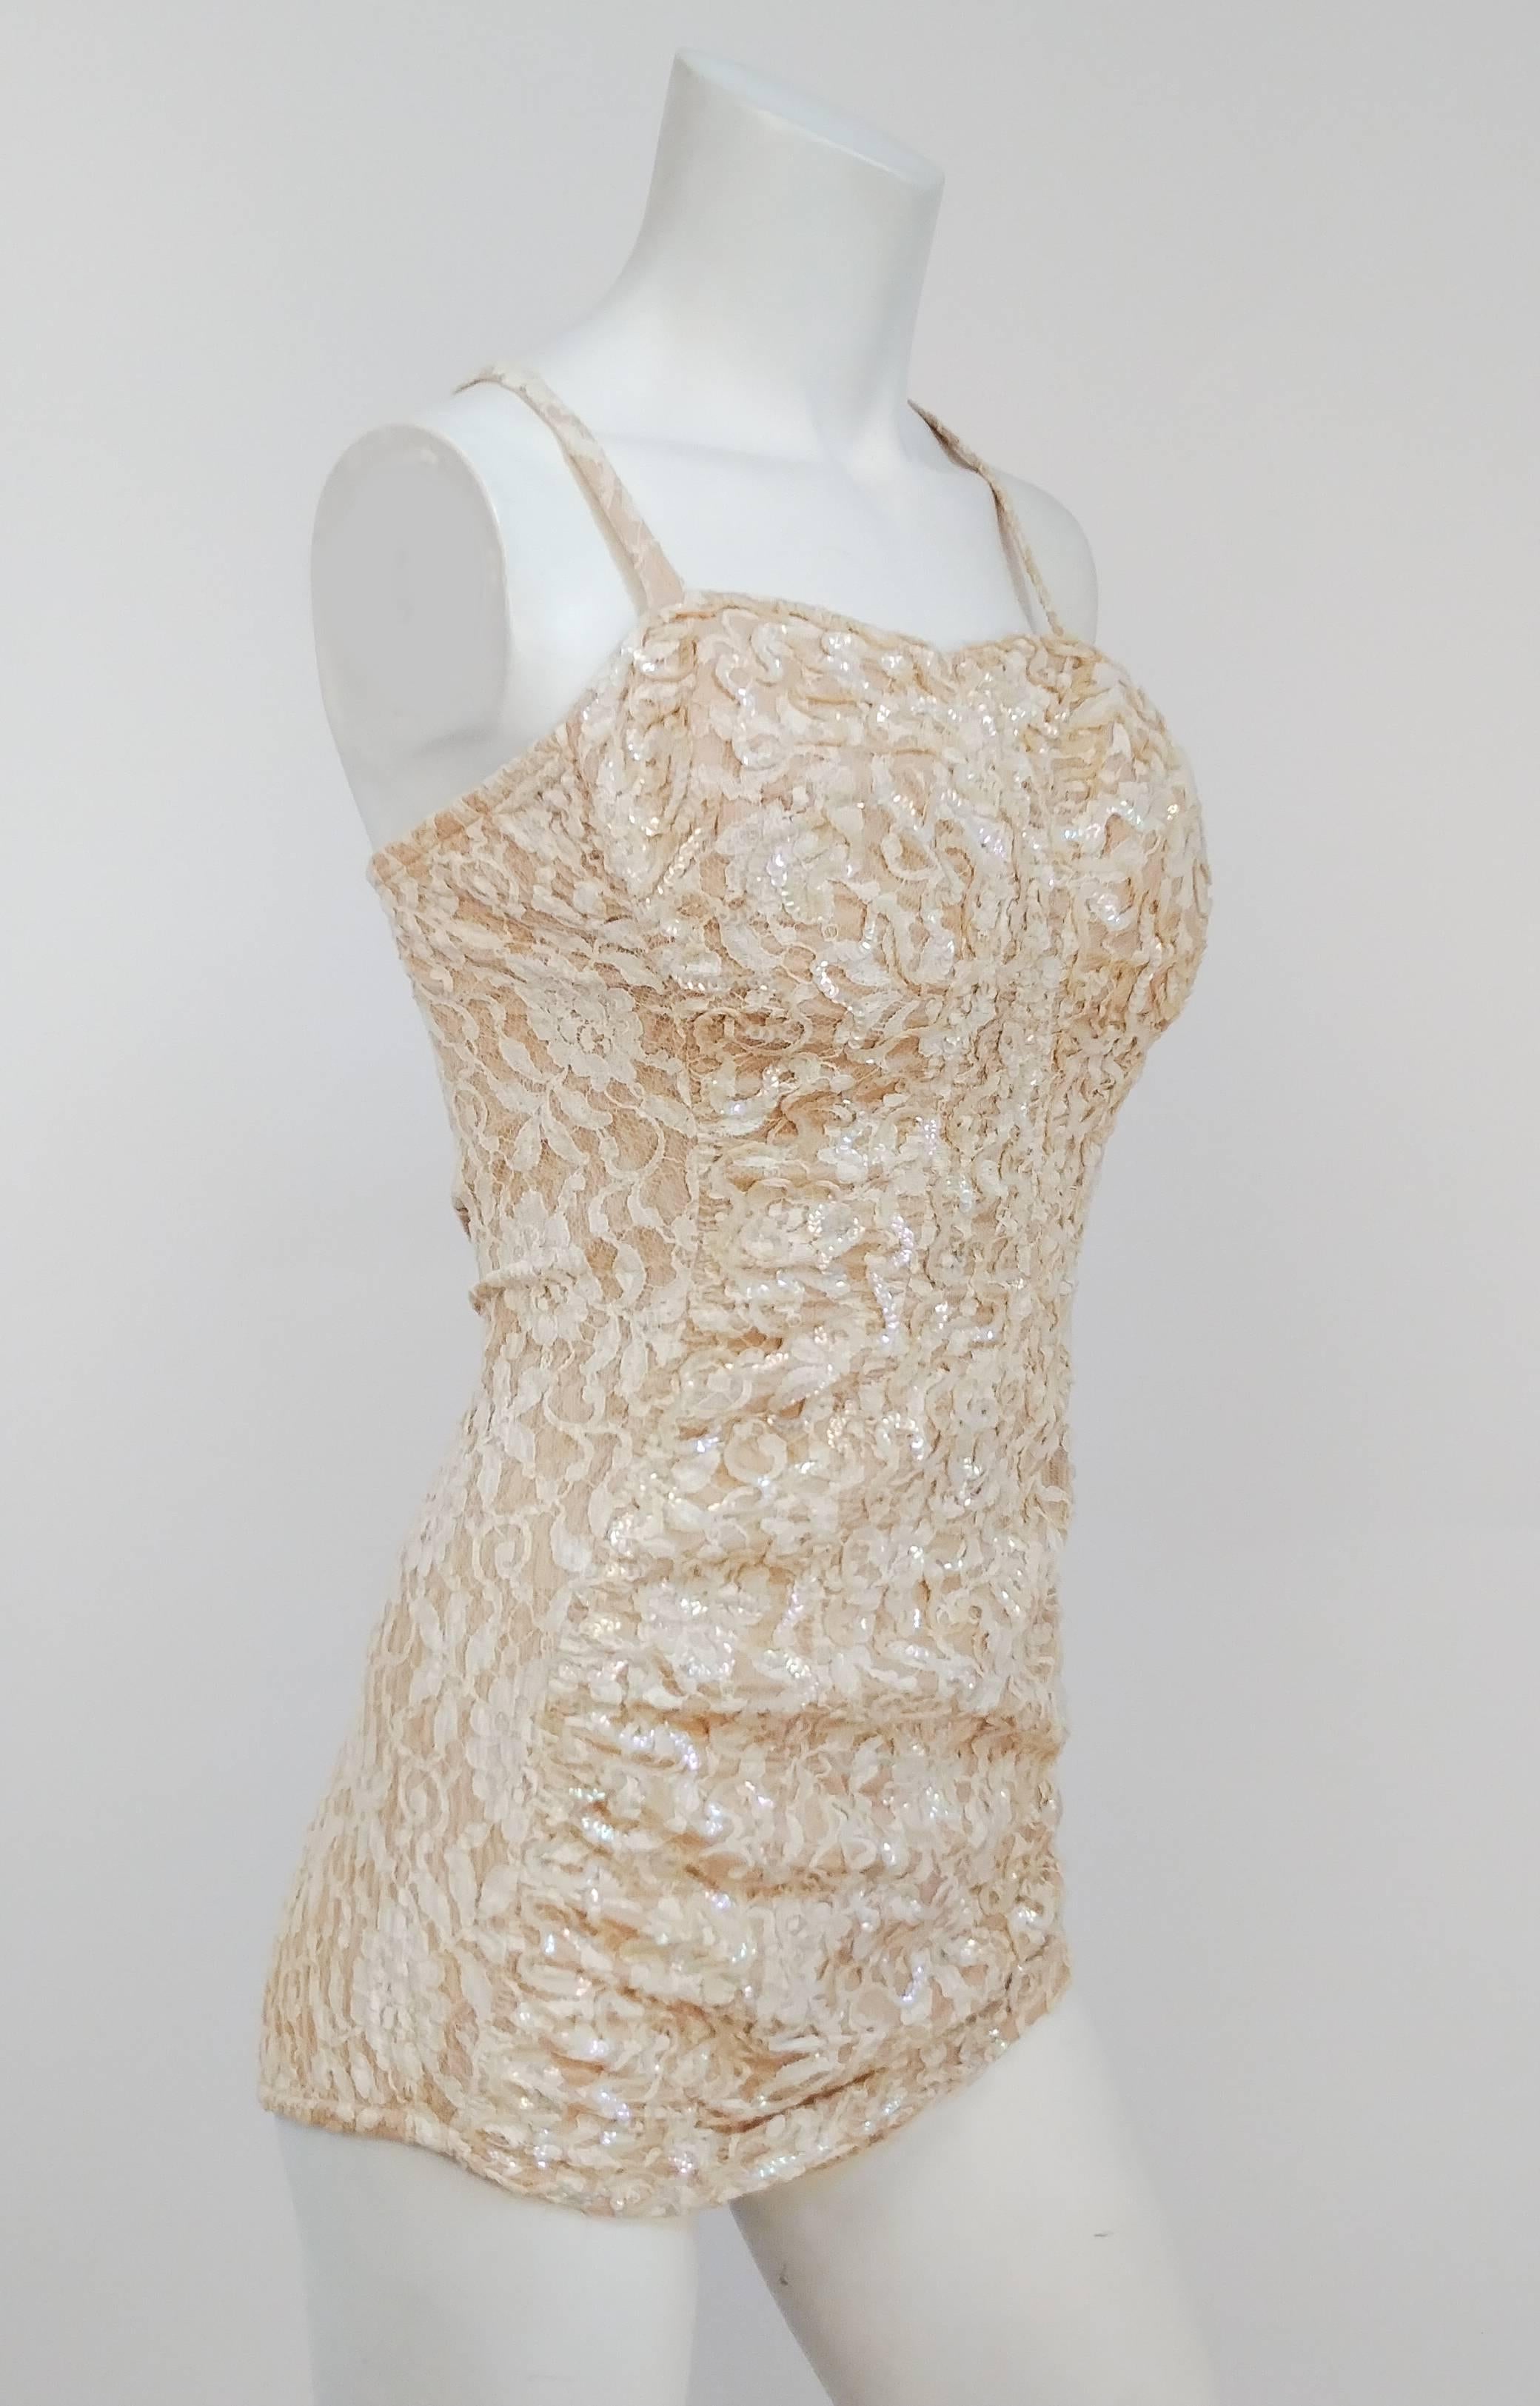 1950s Ivory Sequin Bathing Suit. Sequins sewn over lace, with additional lining and boned bust. Crossover back straps button in place. Back zipper closure. Ruched front for extra va-va-voom. 